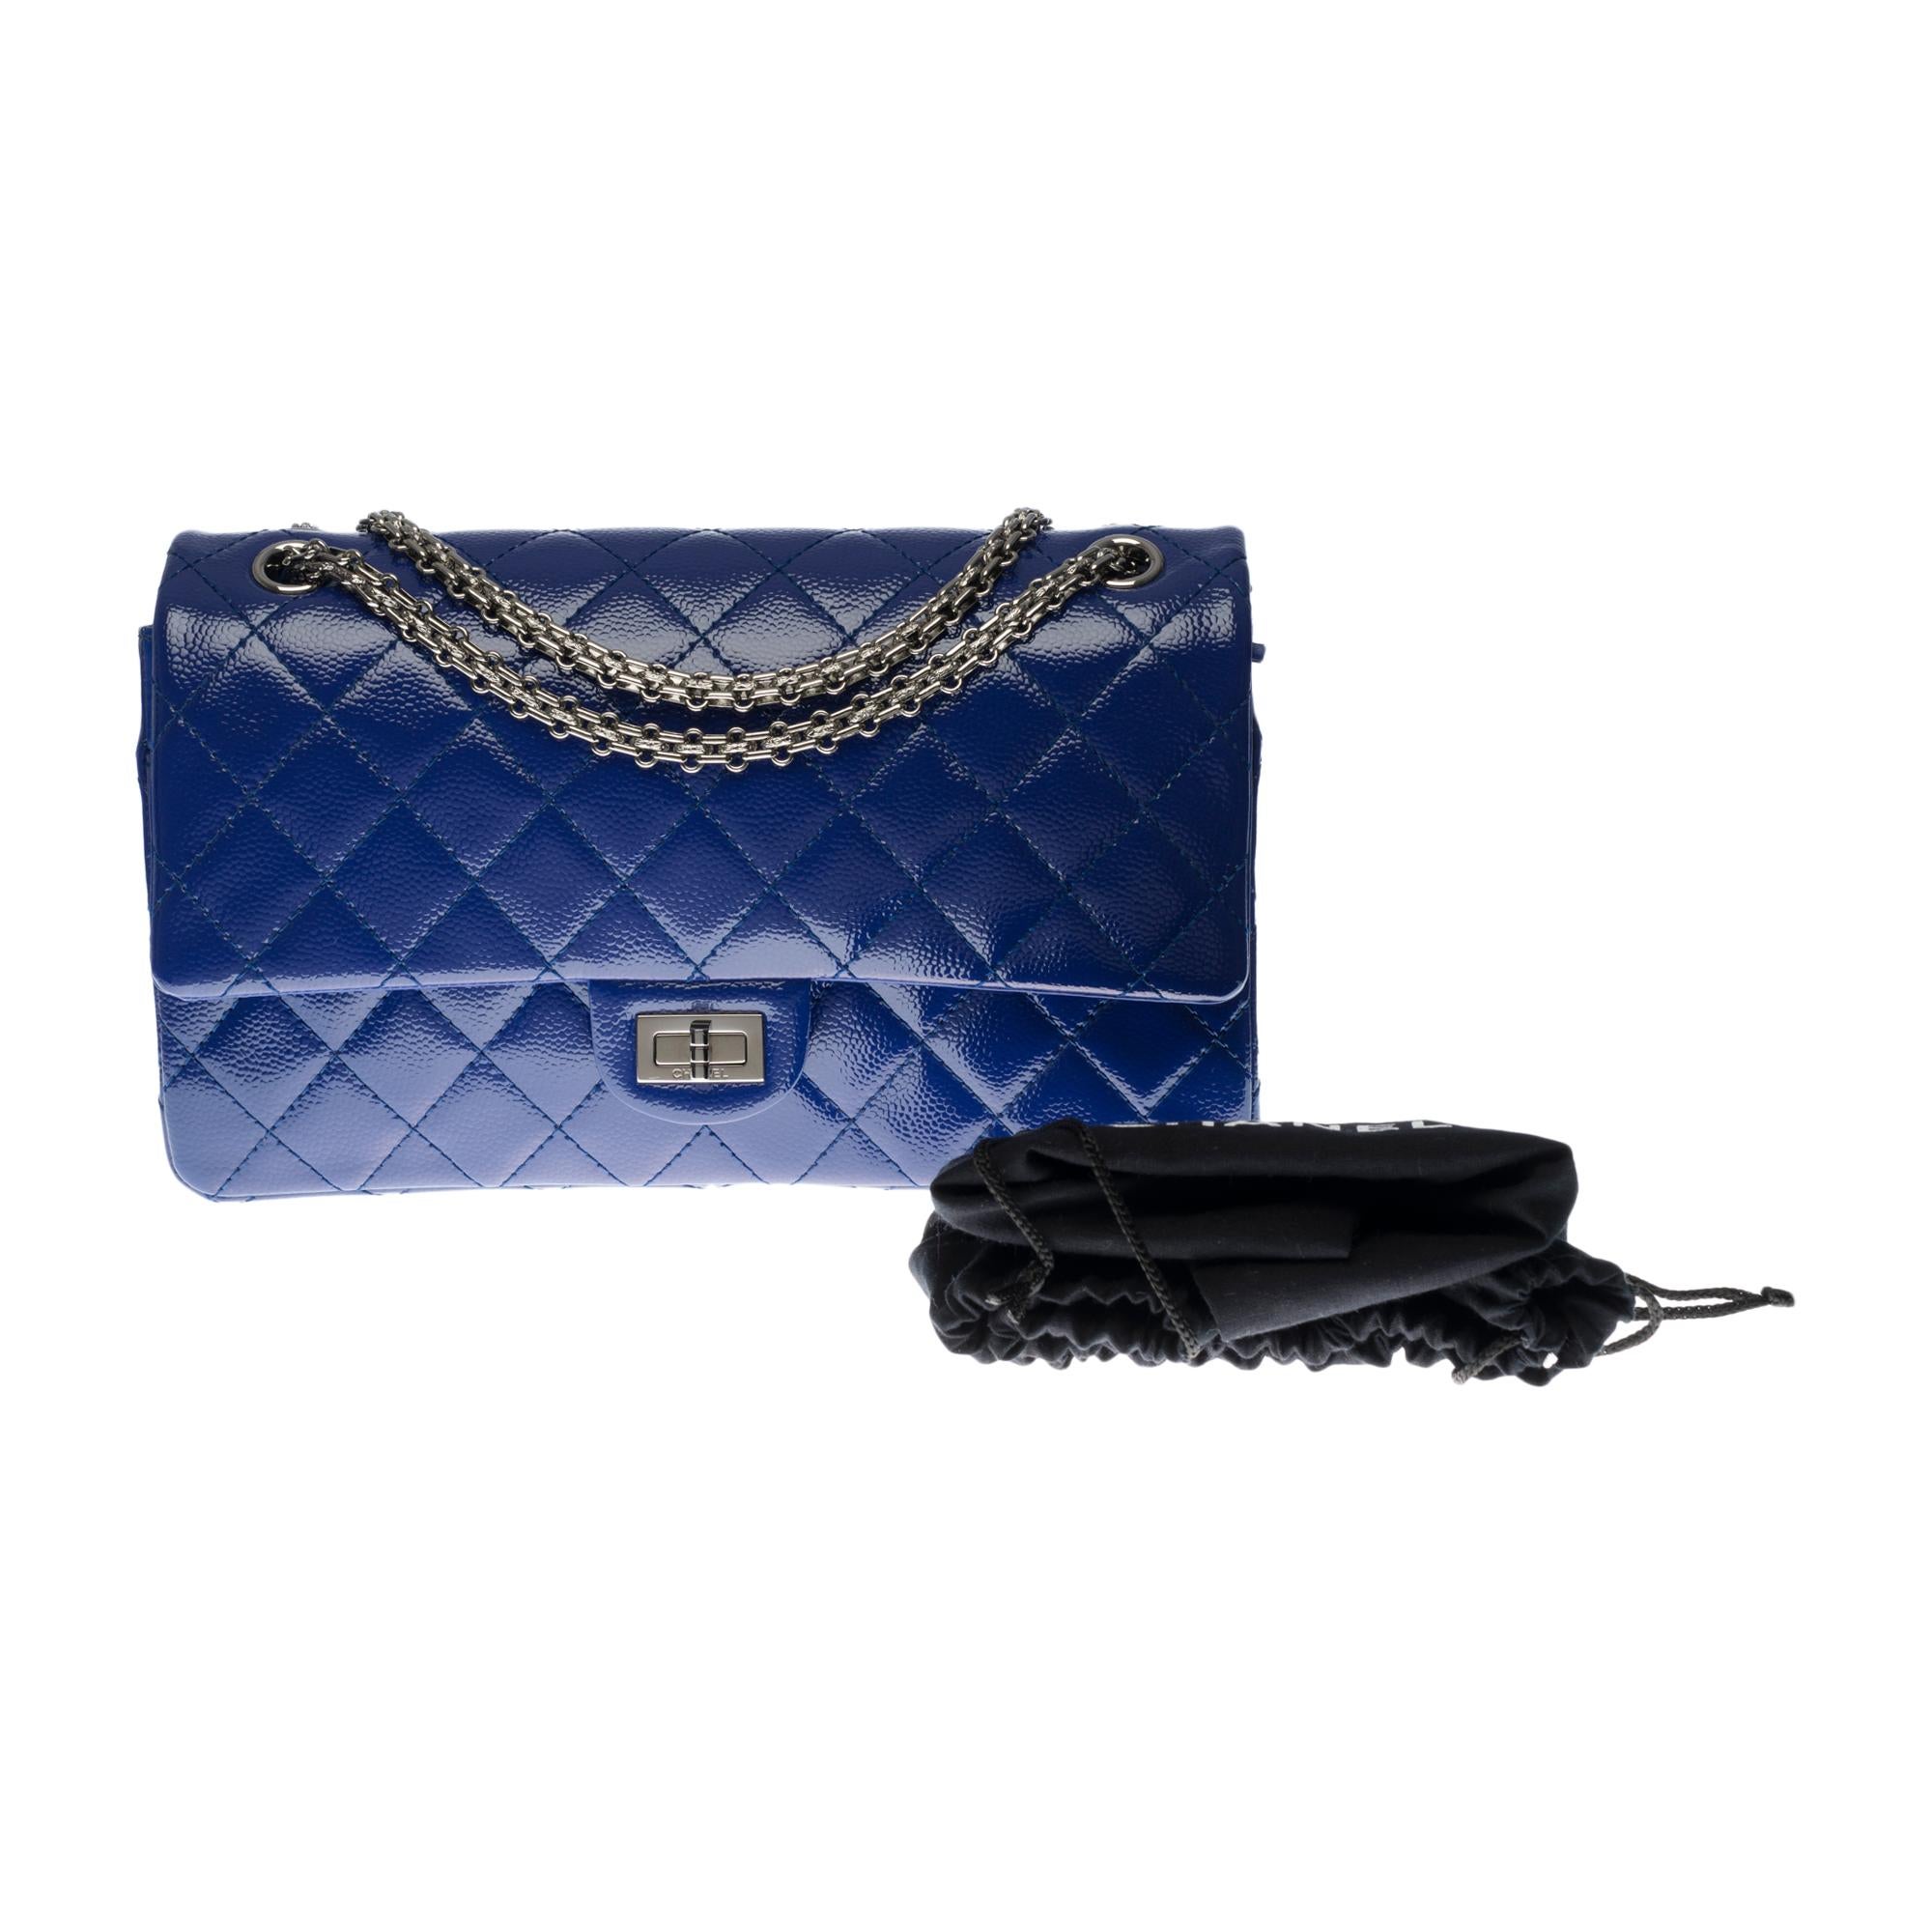 Chanel Classic 2.55 shoulder bag in electric blue quilted patent leather, SHW 3